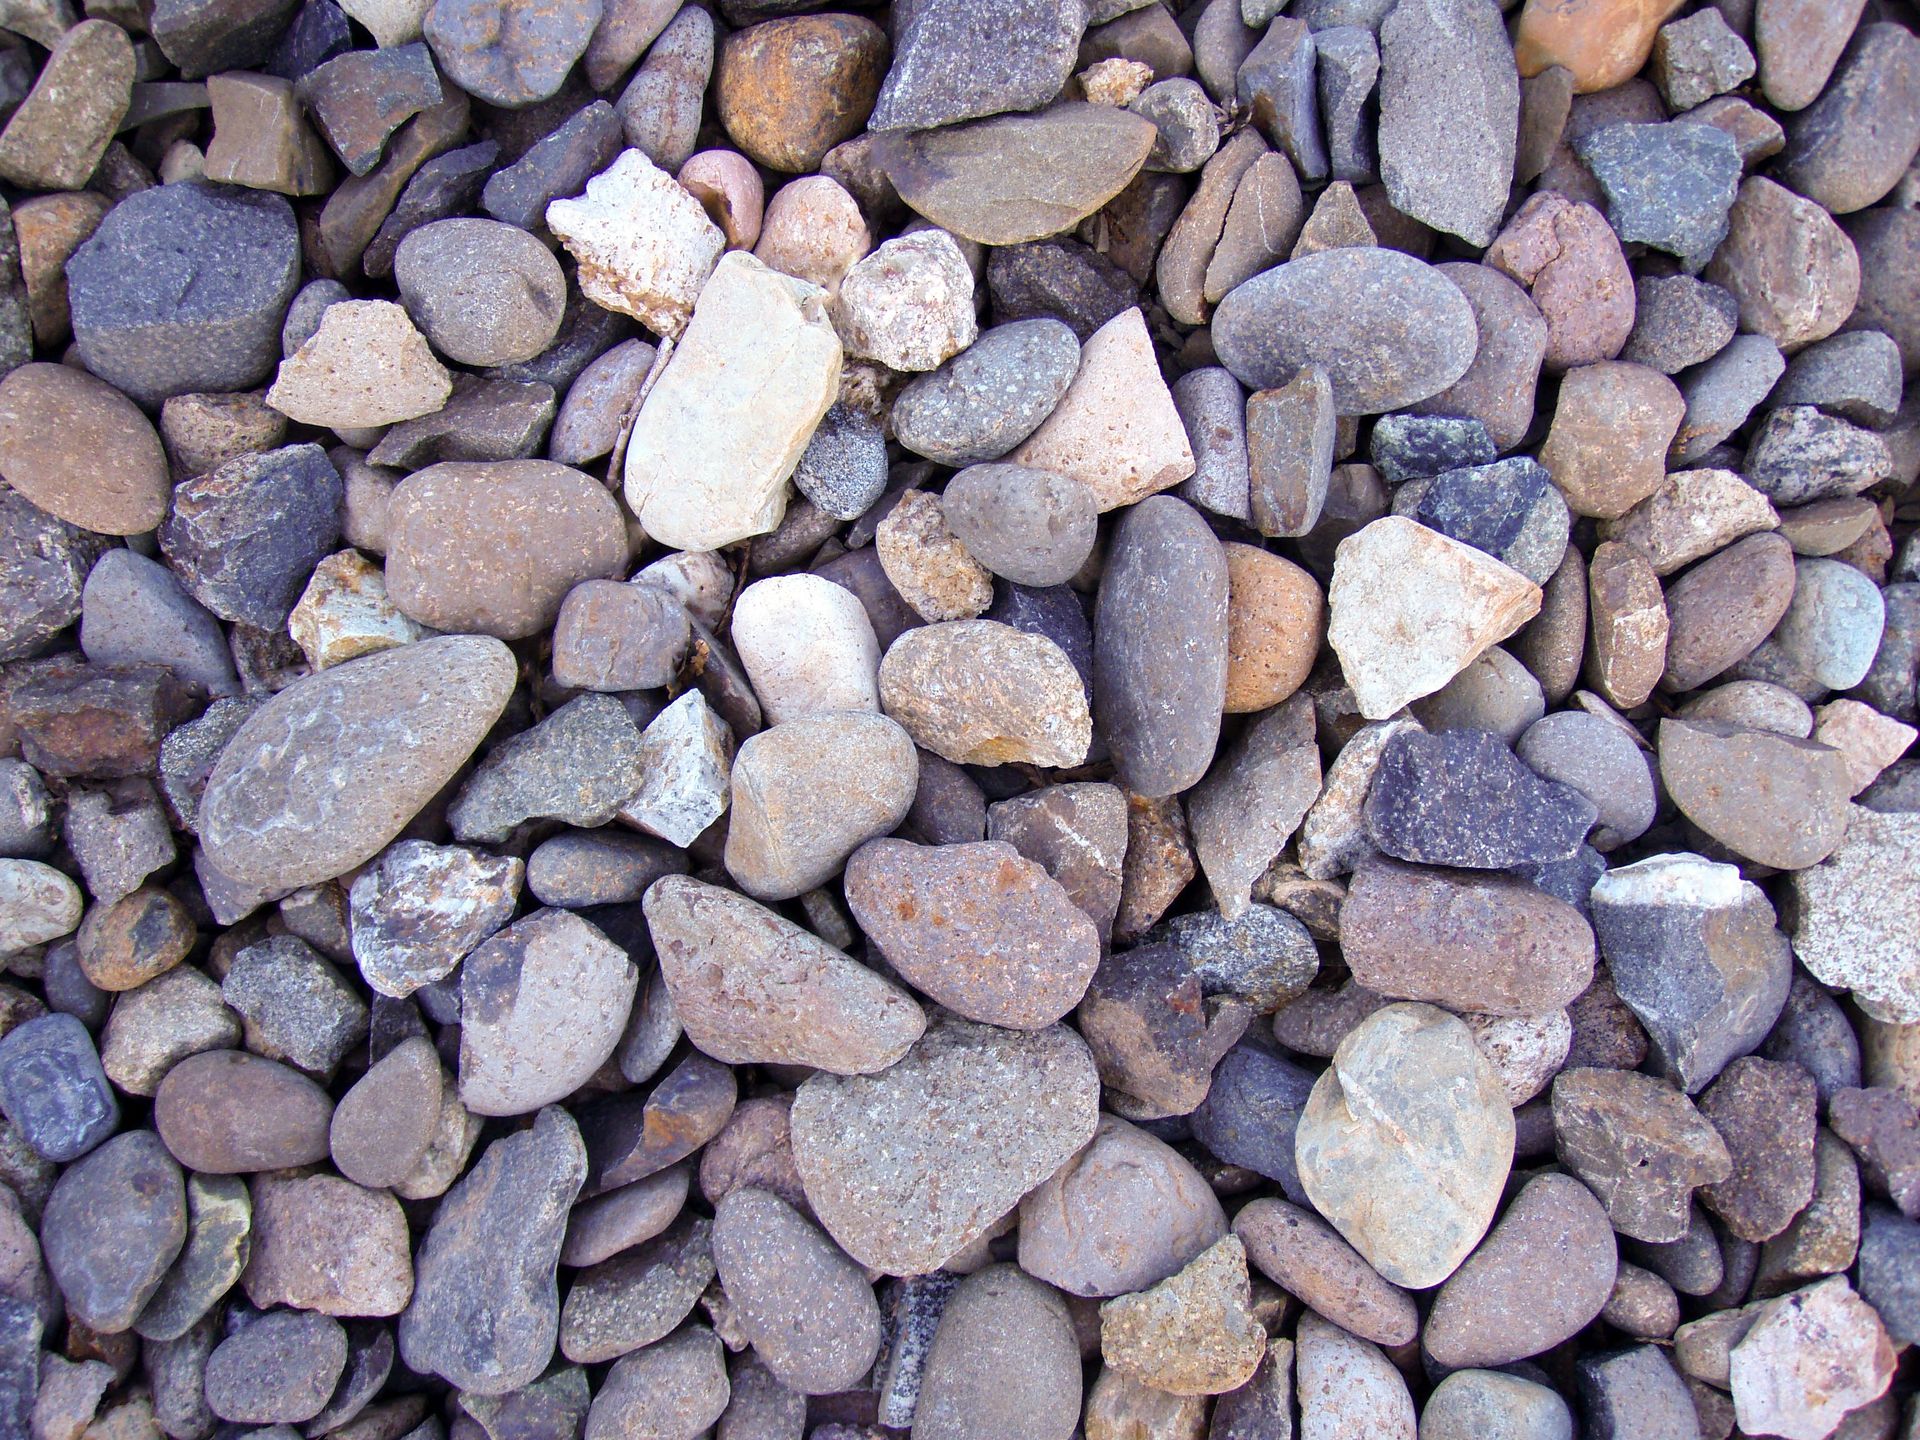 Detail of small gray and white rocks.